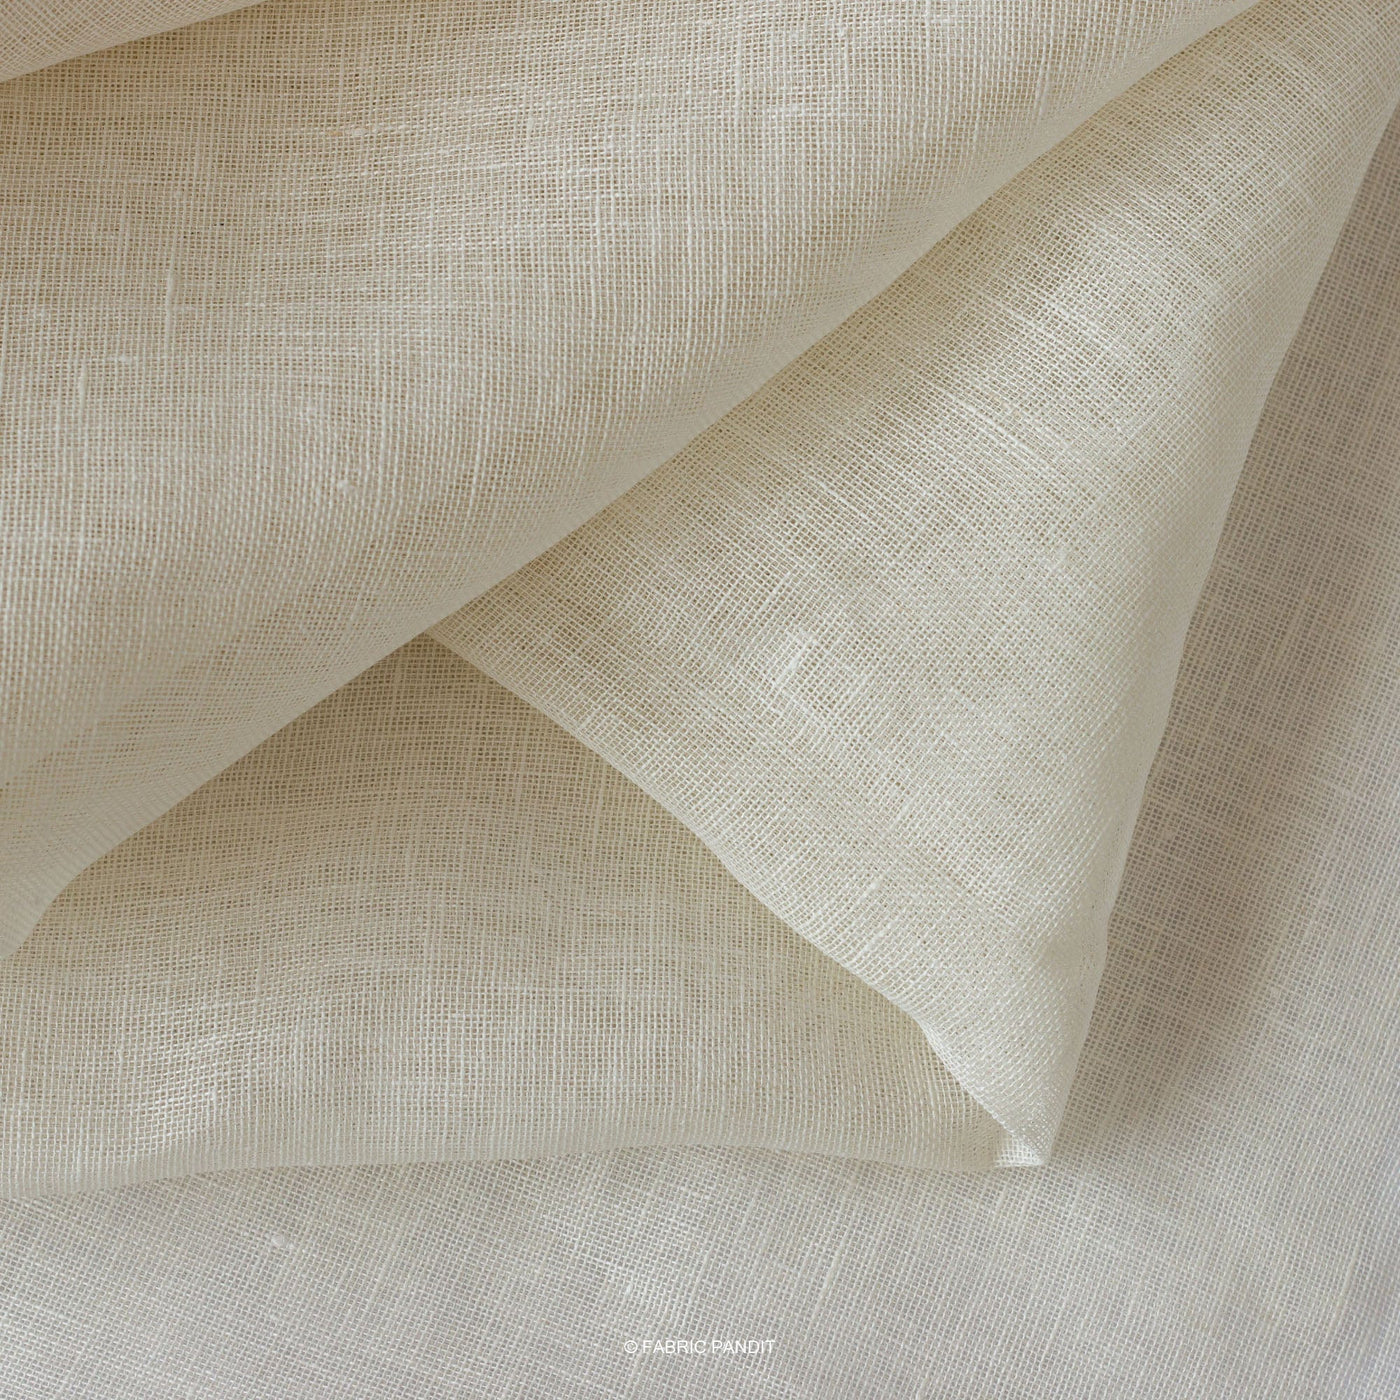 Fabric Pandit Fabric Off-White Dyeable Pure Linen Gauge Plain Fabric (Width 55 Inches, 134 Gms)